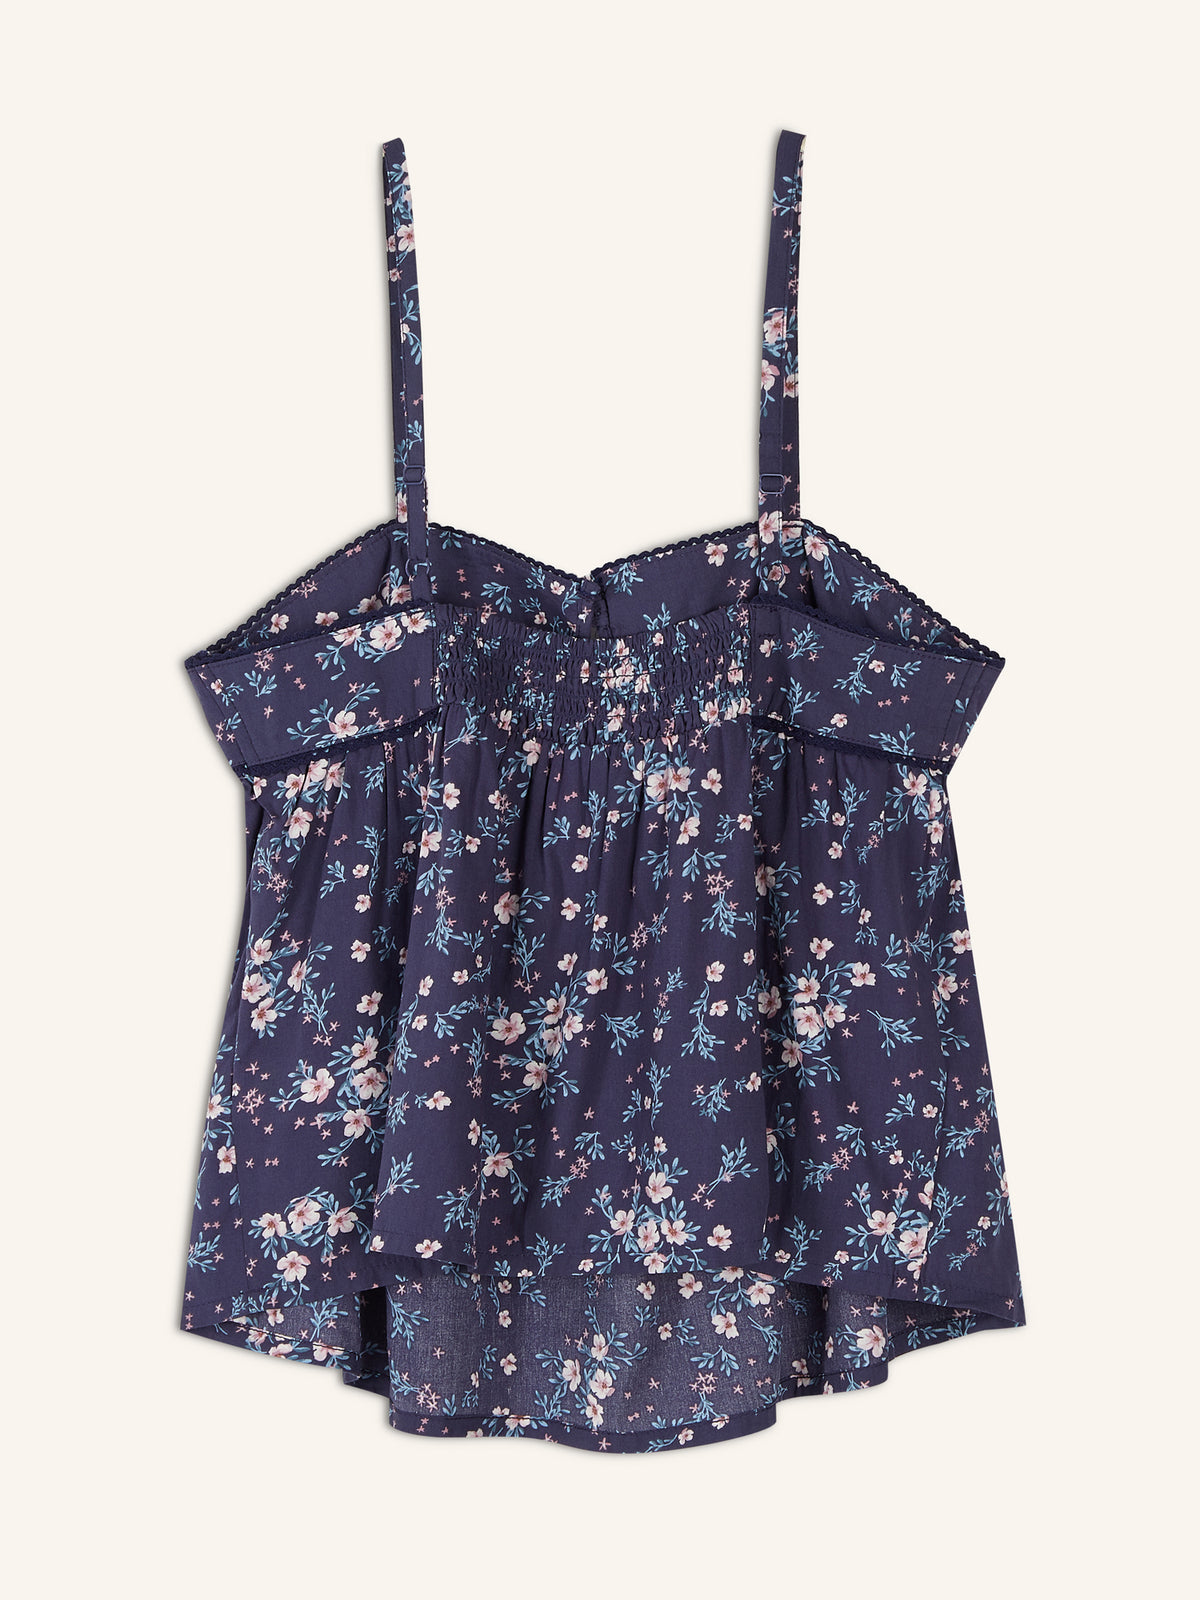 NAVY FLORAL